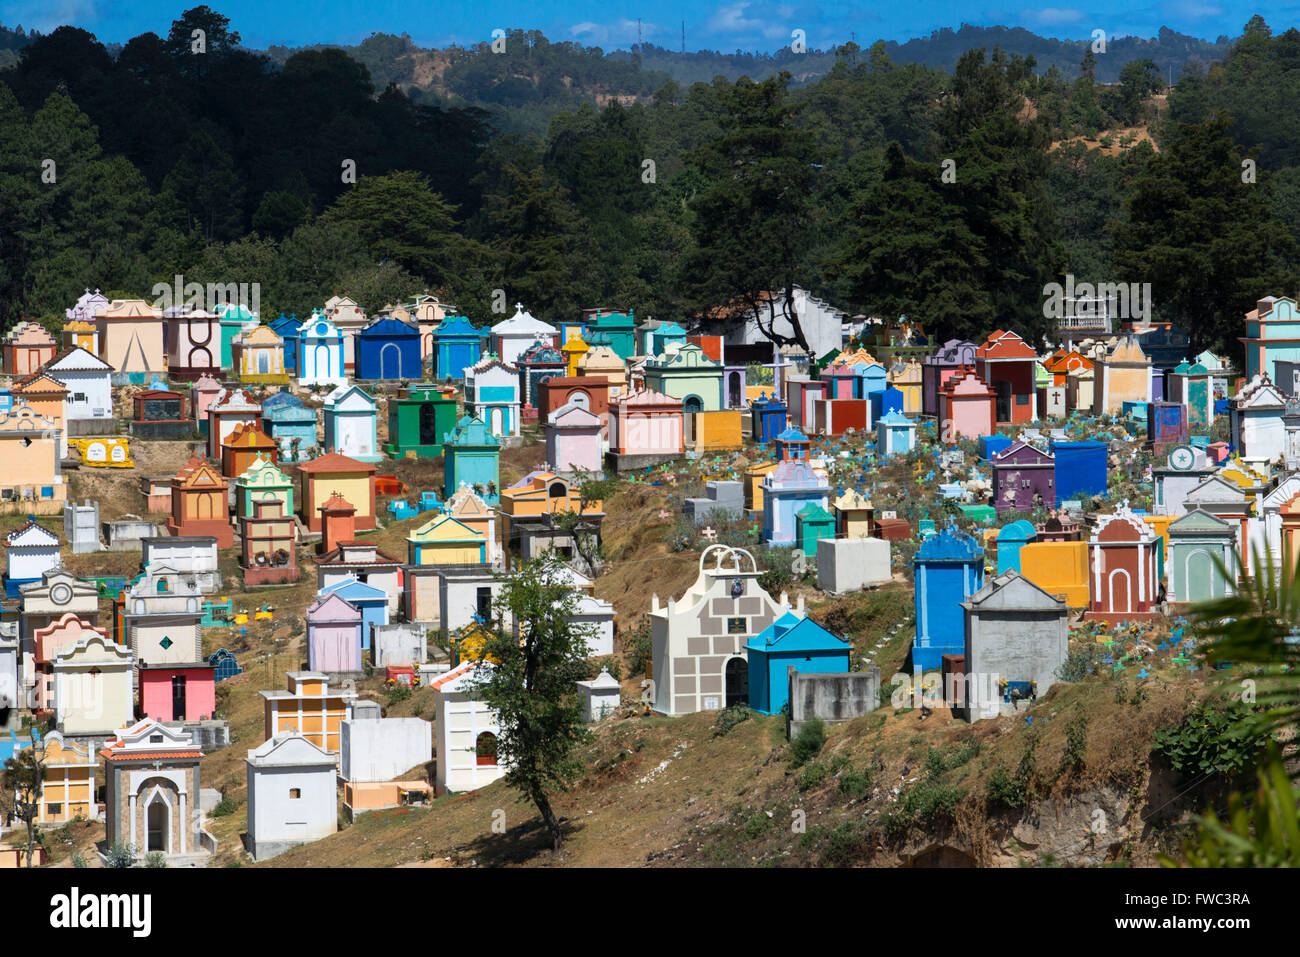 Mausoleums and graves at the town cemetery, Chichicastenango, Guatemala. Stock Photo